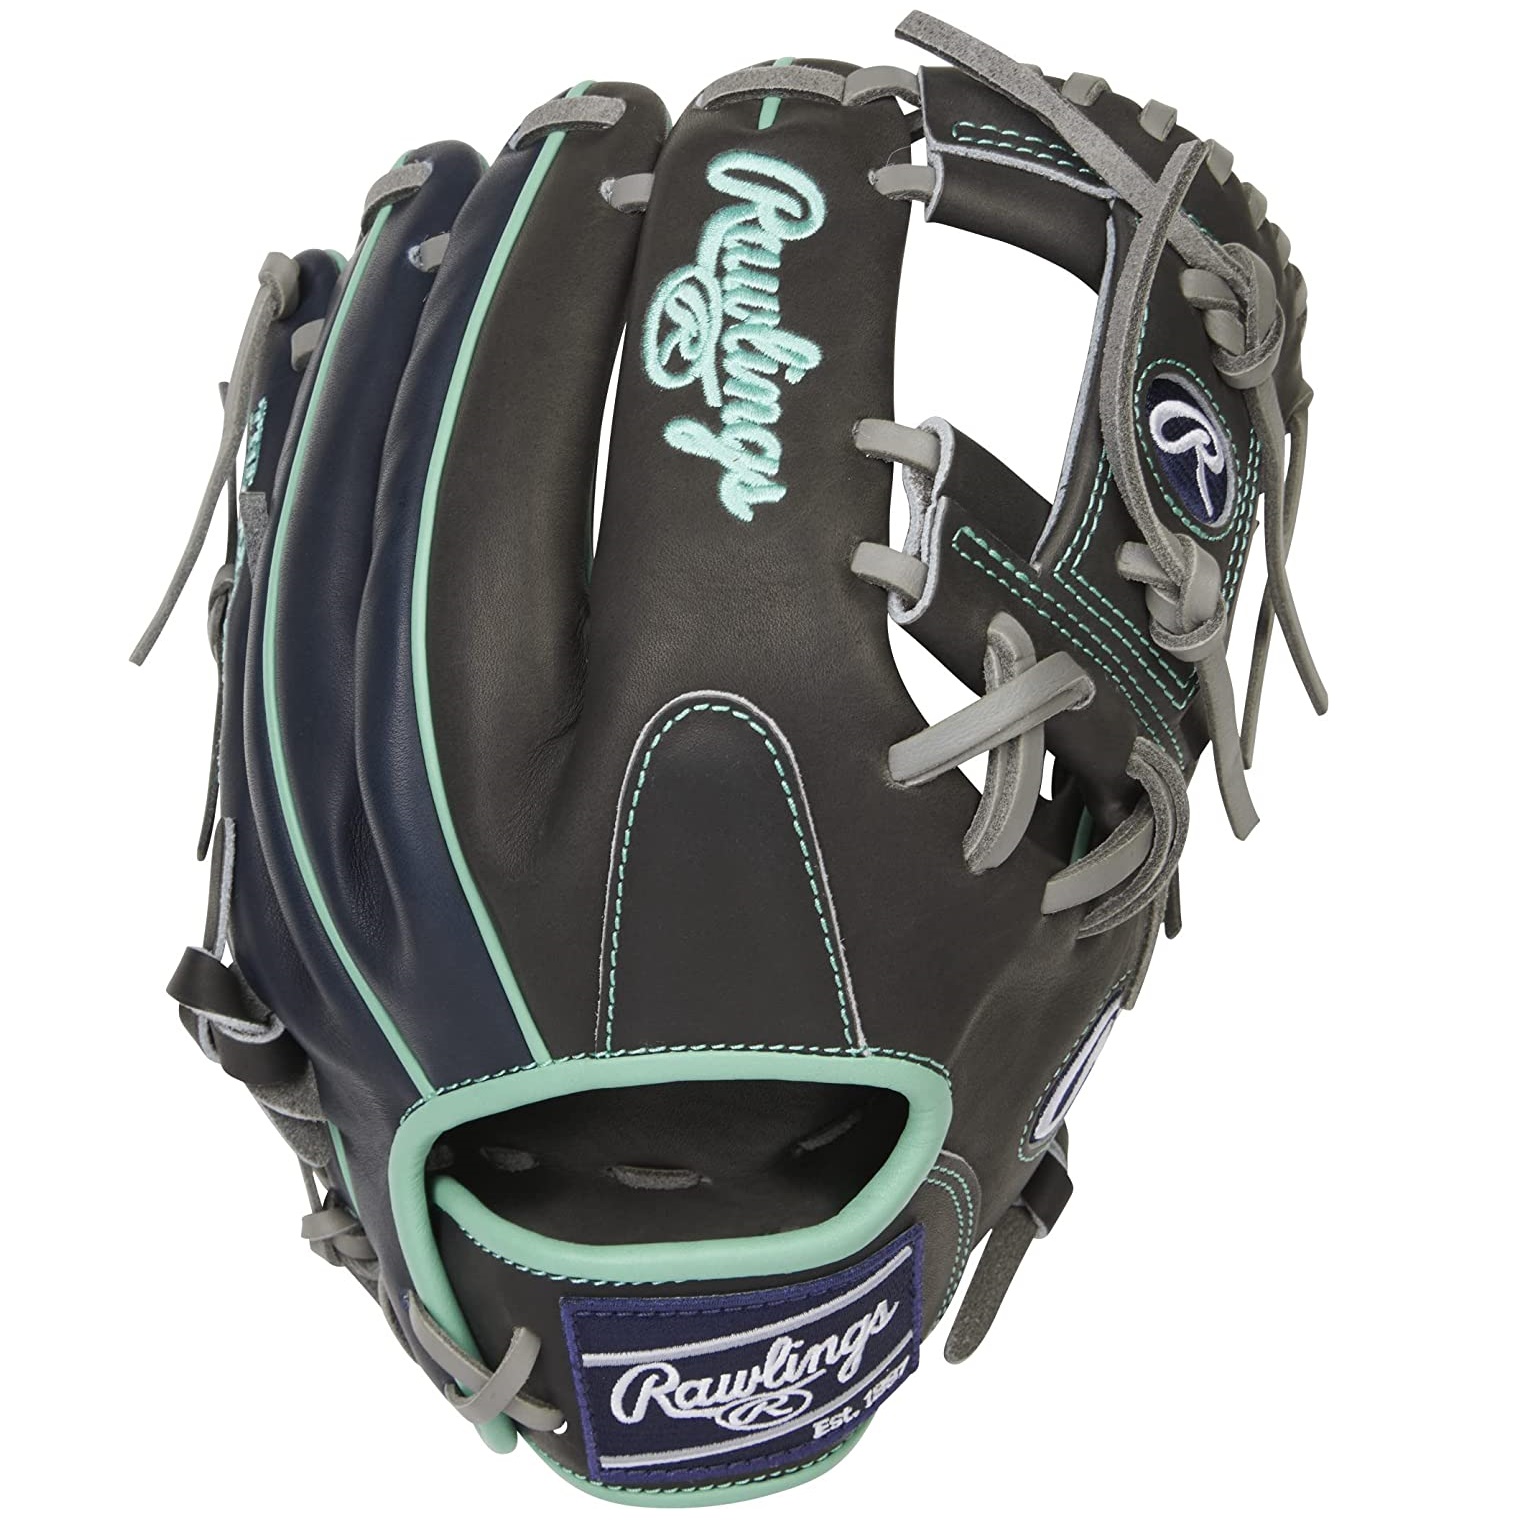 rawlings-heart-of-the-hide-baseball-glove-11-5-i-web-mint-contour-fit-right-hand-throw PROR204U-2DS-RightHandThrow Rawlings  The Rawlings R2G PROR204U Heart of the Hide baseball glove and